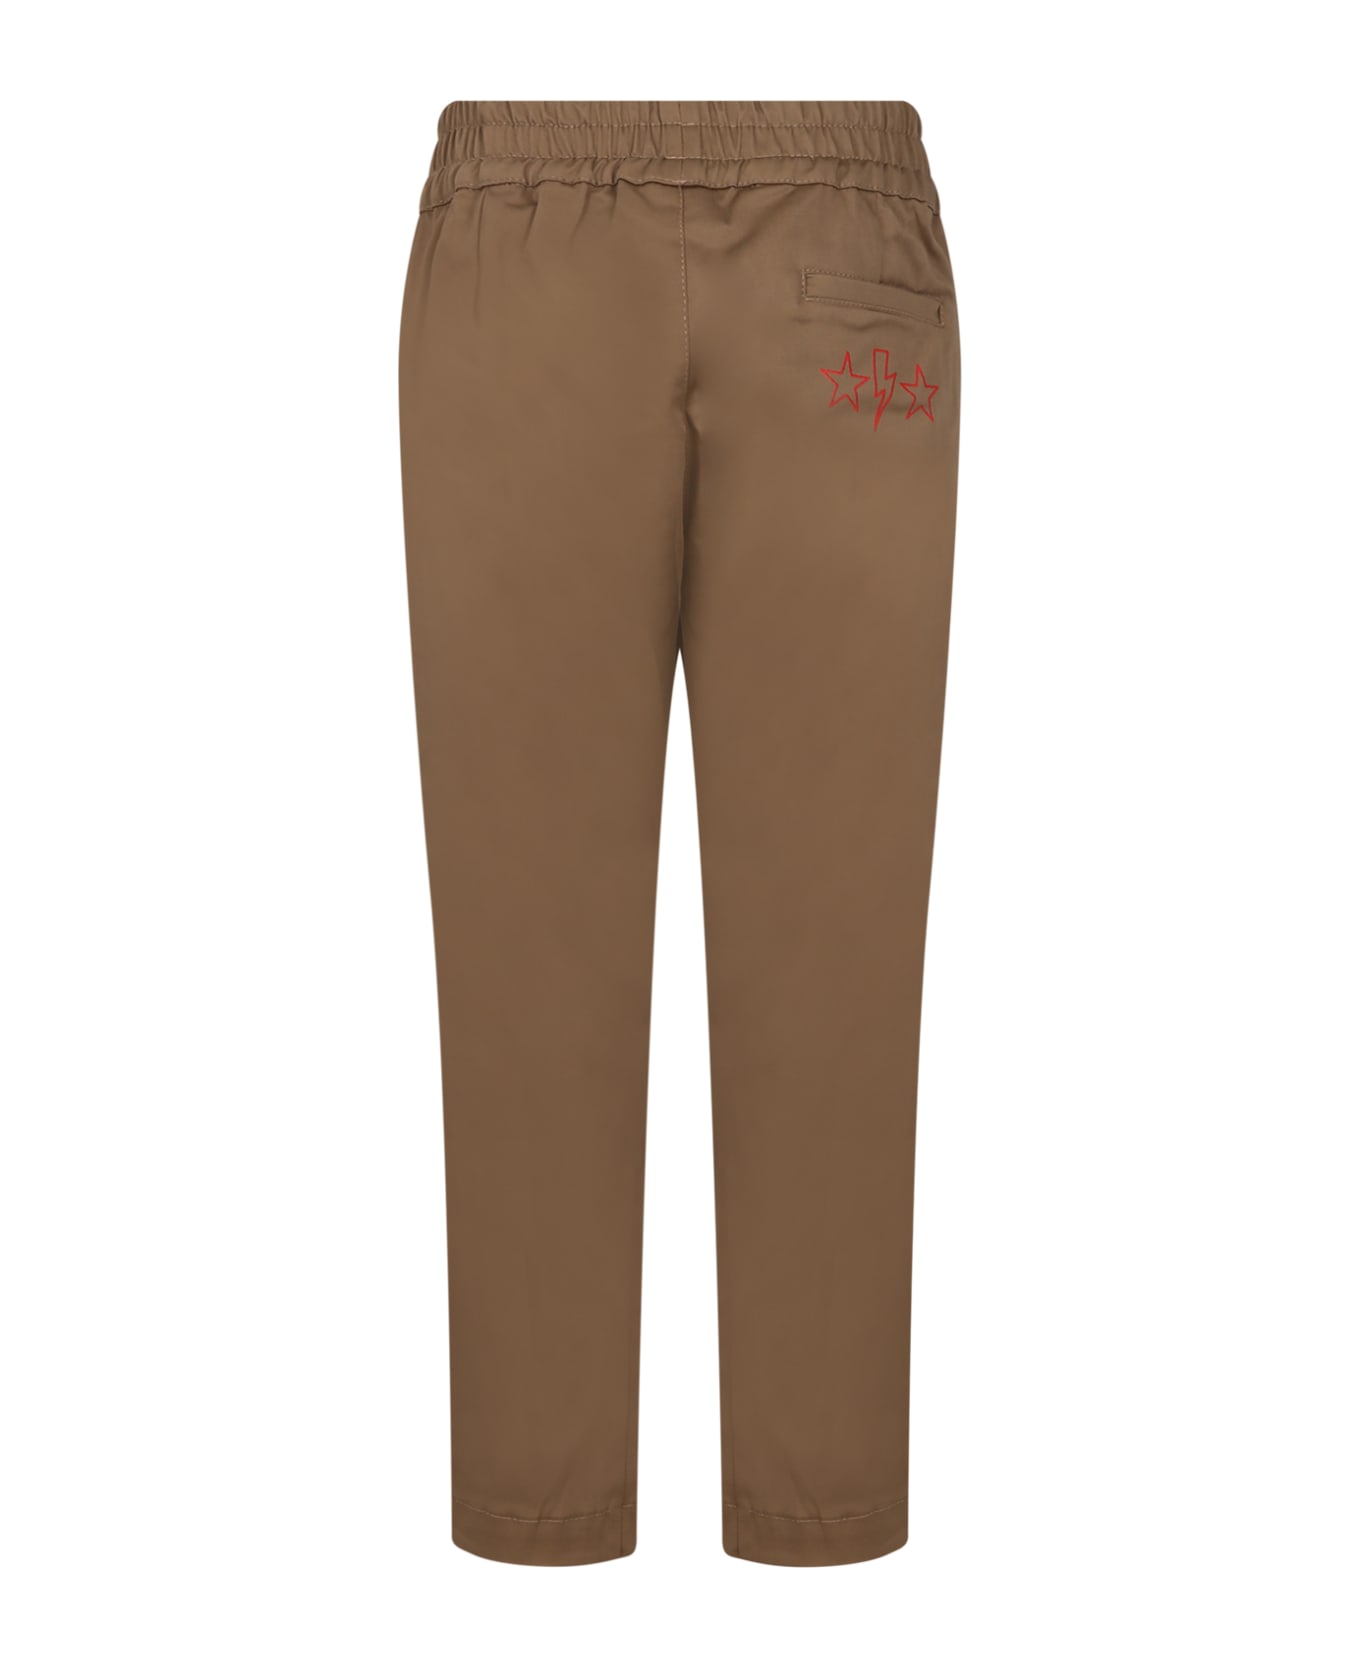 Neil Barrett Brown Trousers For Boy With Iconic Lightning Bolt And Logo - Brown